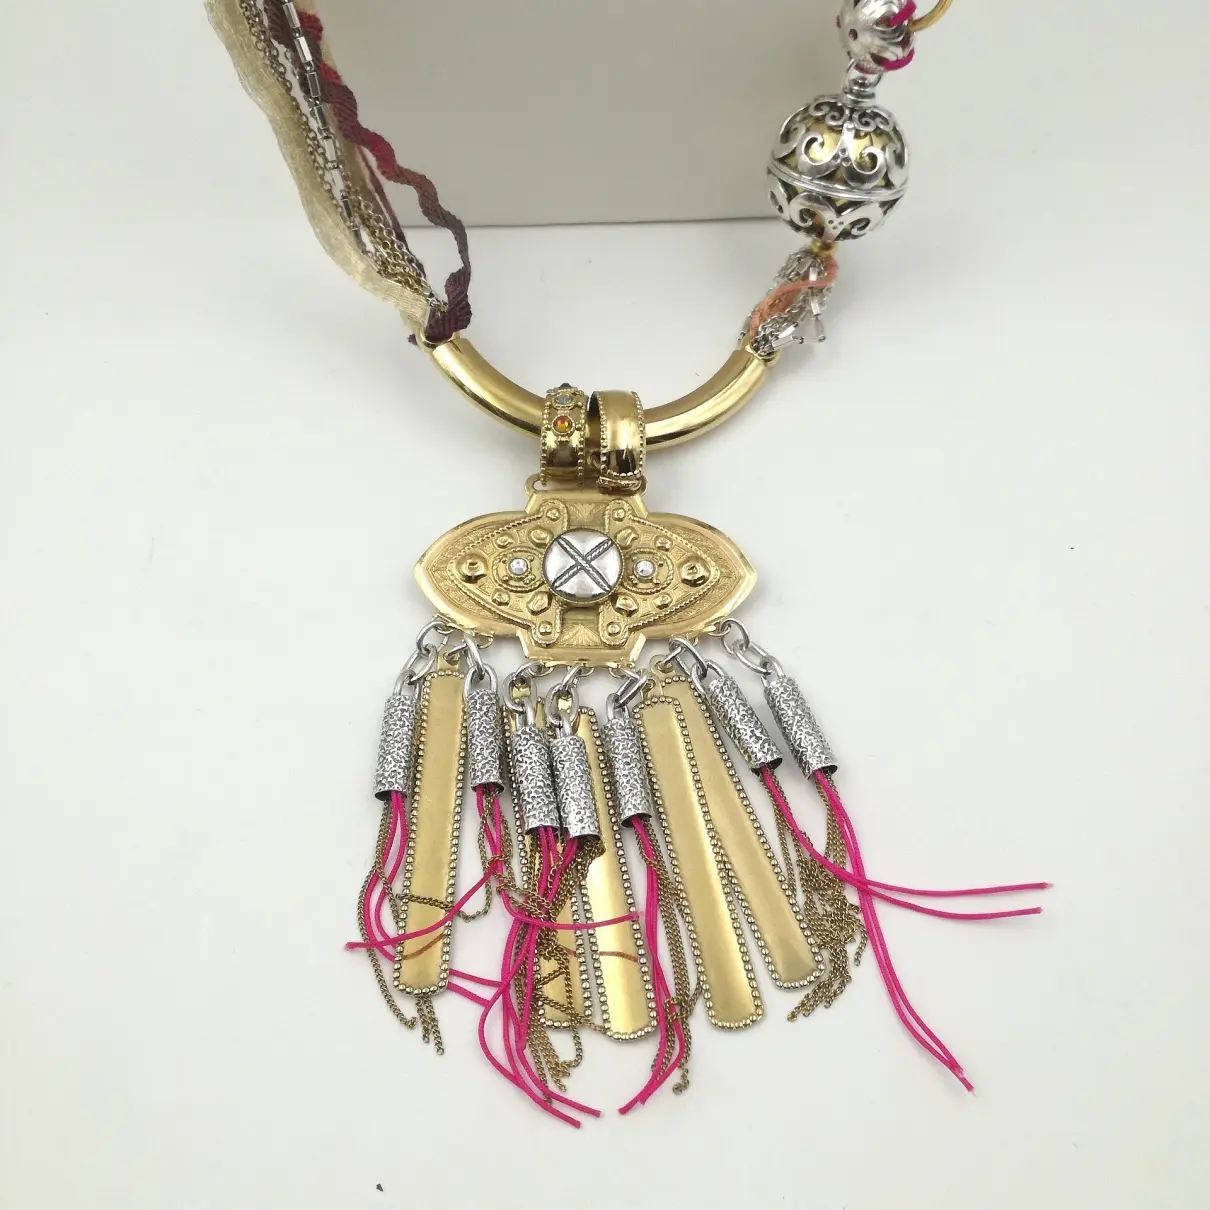 Buy Reminiscence Necklace online